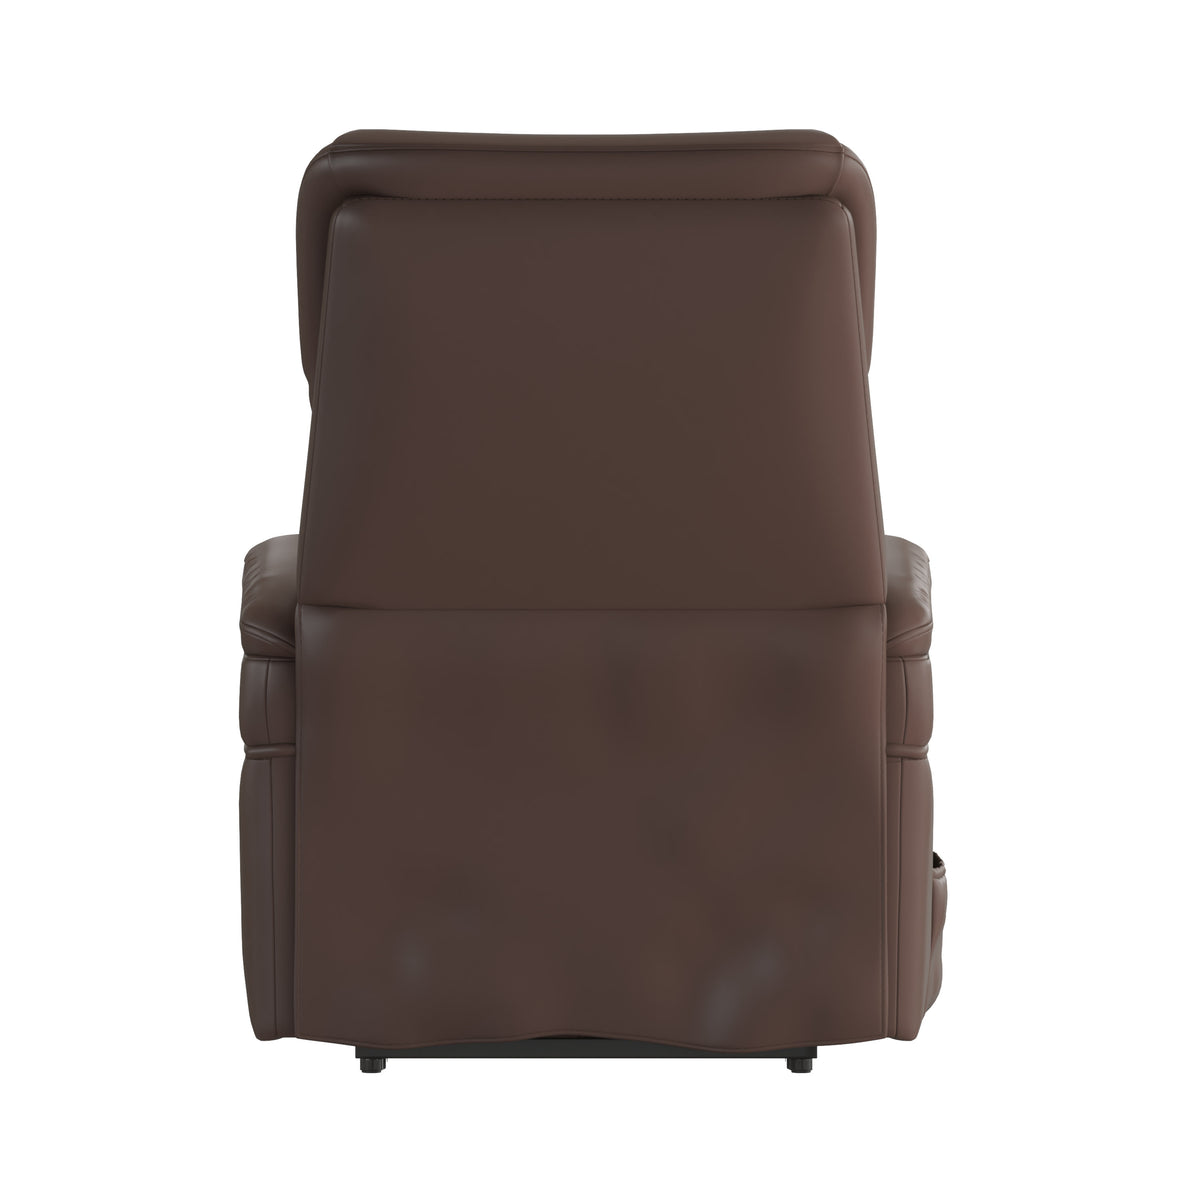 Cognac LeatherSoft |#| Cognac LeatherSoft Remote Powered Lift Recliner for Elderly - Medical Furniture